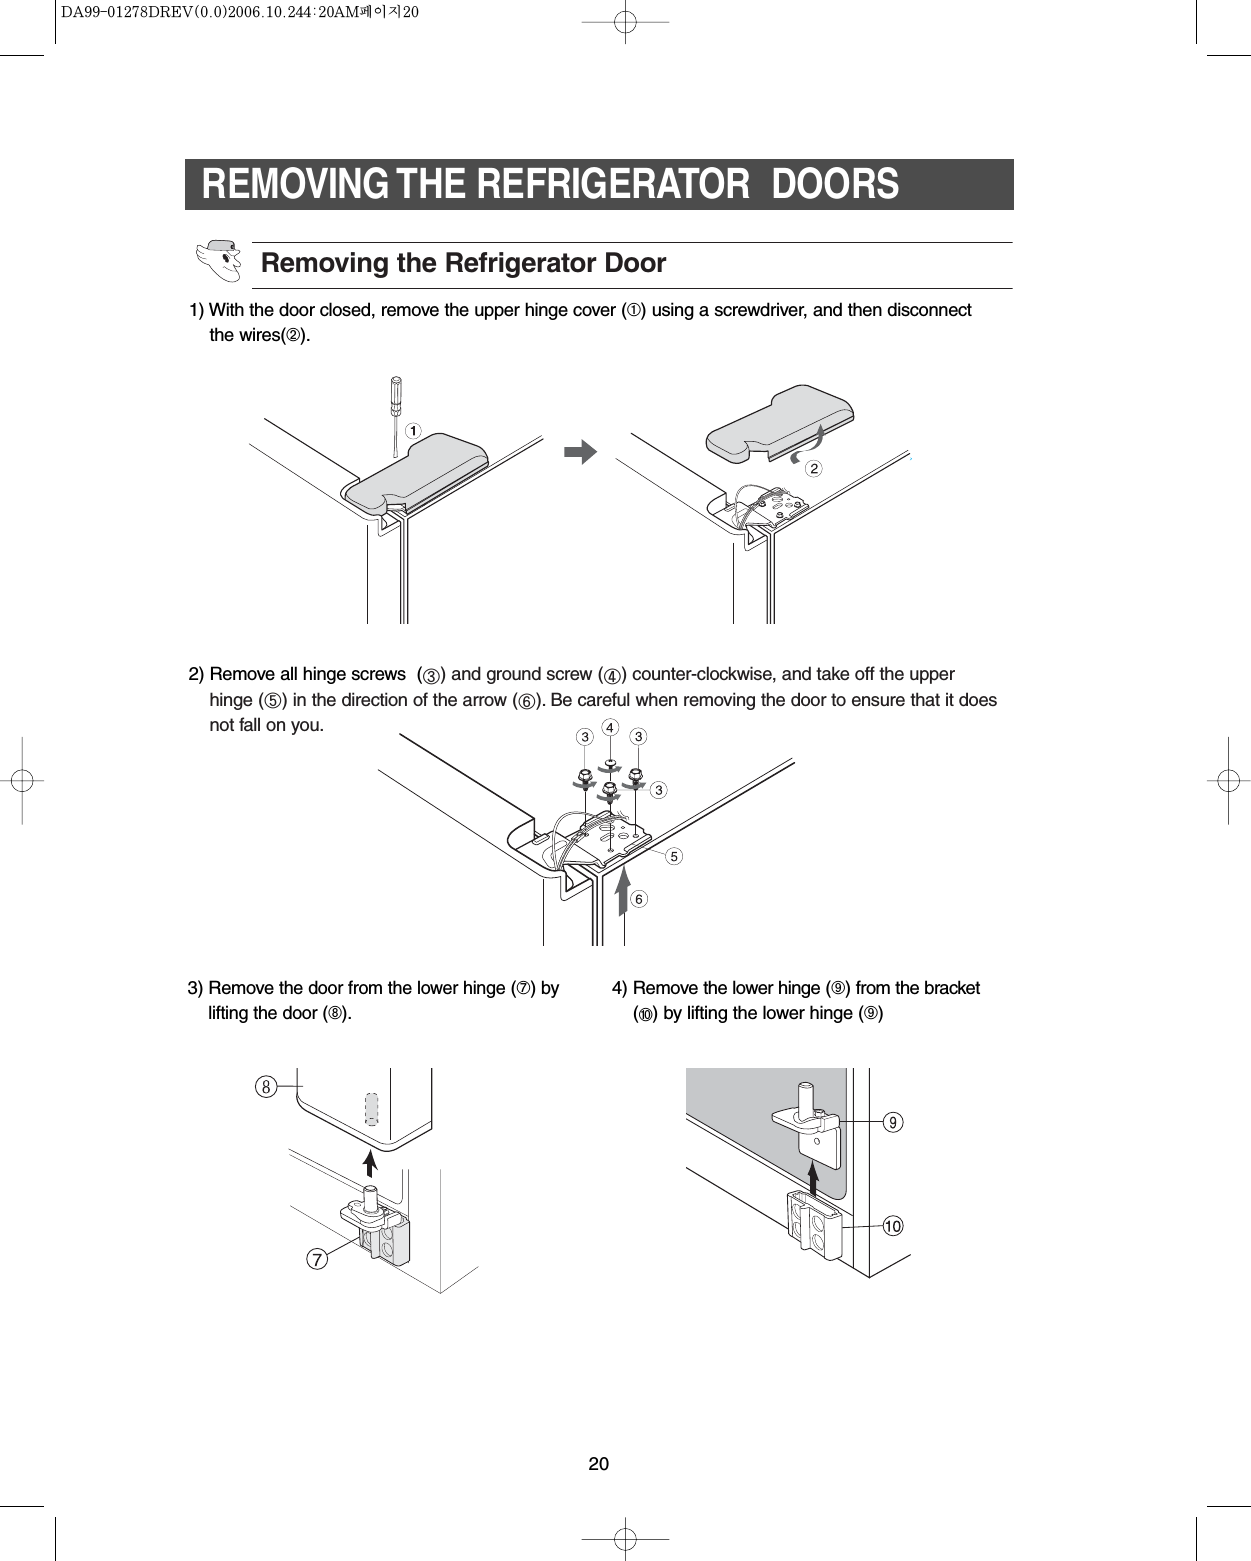 20REMOVING THE REFRIGERATOR  DOORS3) Removethe door from the lower hinge (➆)bylifting the door (➇).4) Remove the lower hinge (➈) from the bracket(➉) by lifting the lower hinge (➈)1) With the door closed, remove the upper hinge cover (➀) using a screwdriver, and then disconnectthe wires(➁).2) Remove all hinge screws  () and ground screw () counter-clockwise, and take off the upperhinge () in the direction of the arrow (). Be careful when removing the door to ensure that it doesnot fall on you.Removing the Refrigerator Door